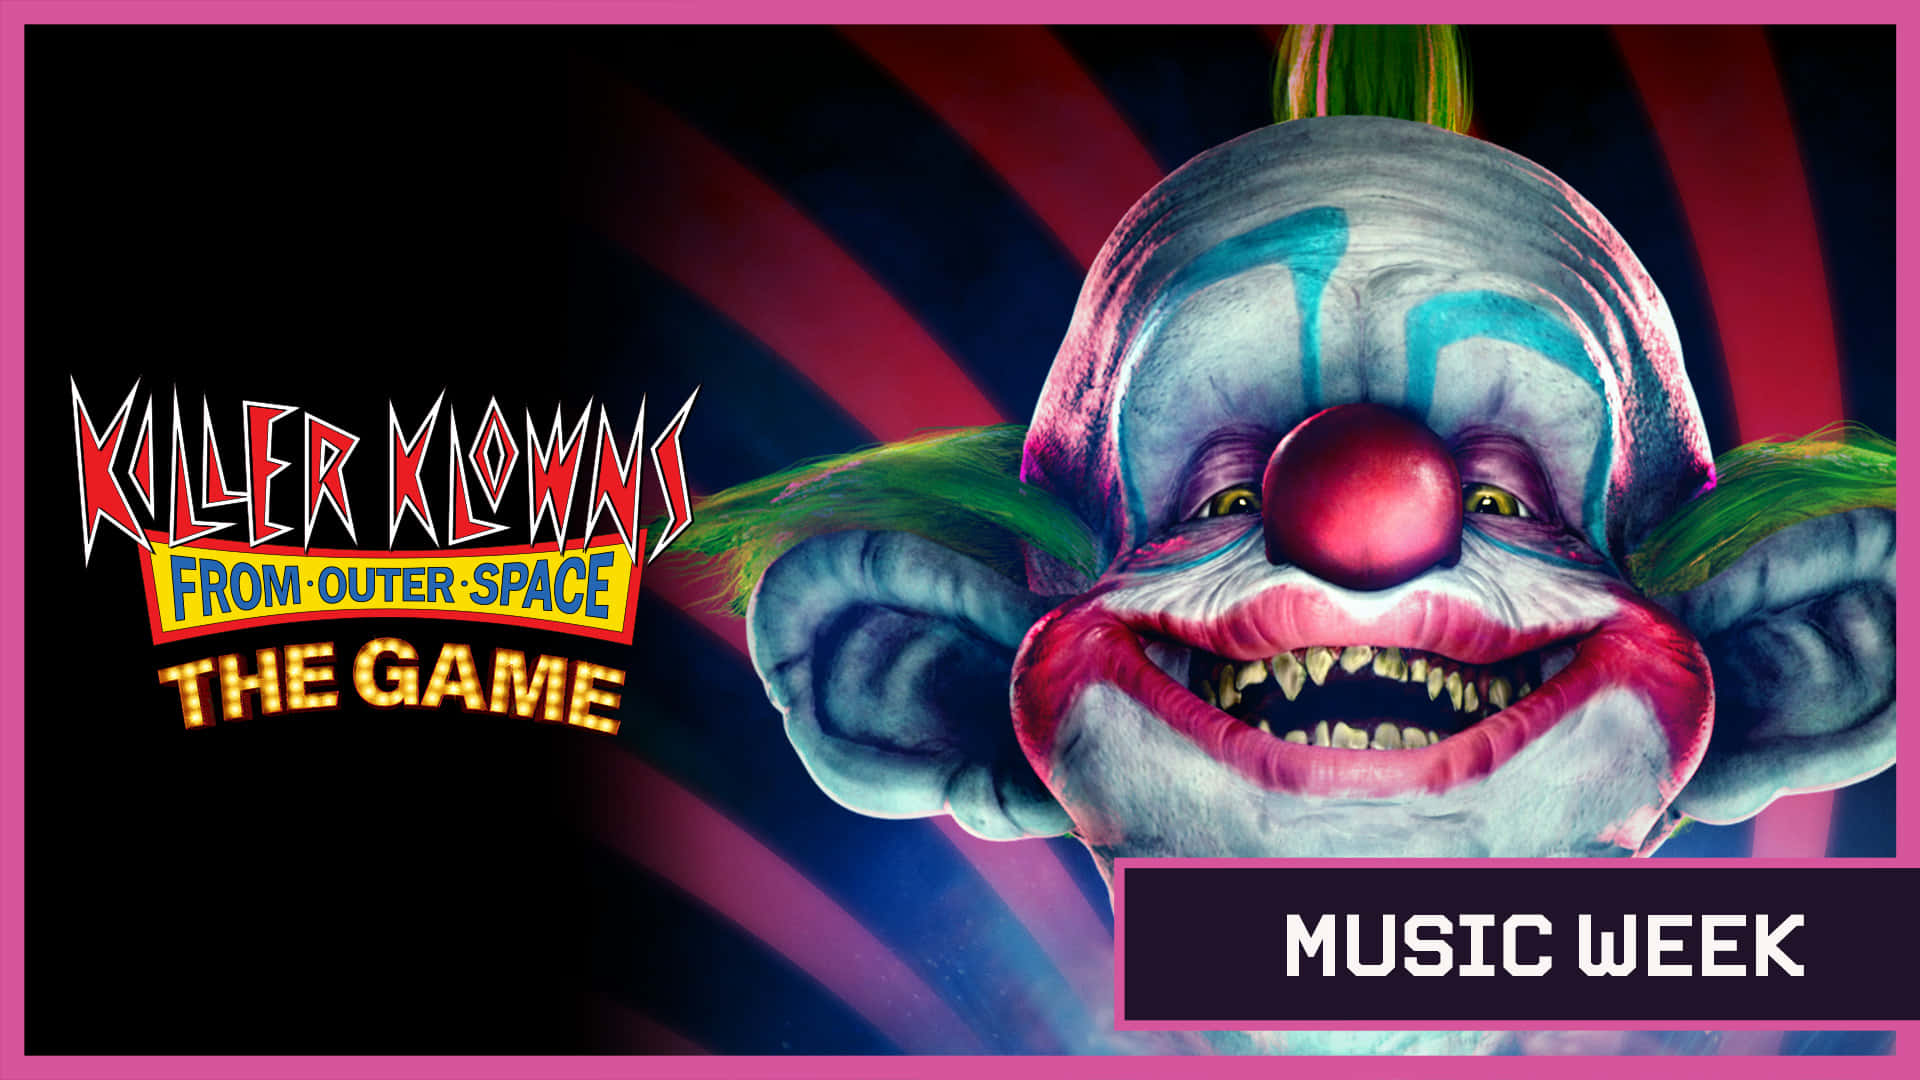 Killer from outer space. Killer Klowns from Outer Space the game. Killer Klowns from Outer Space 1988. Killer Klowns from Outer Space. Клоуны-убийцы из космоса.